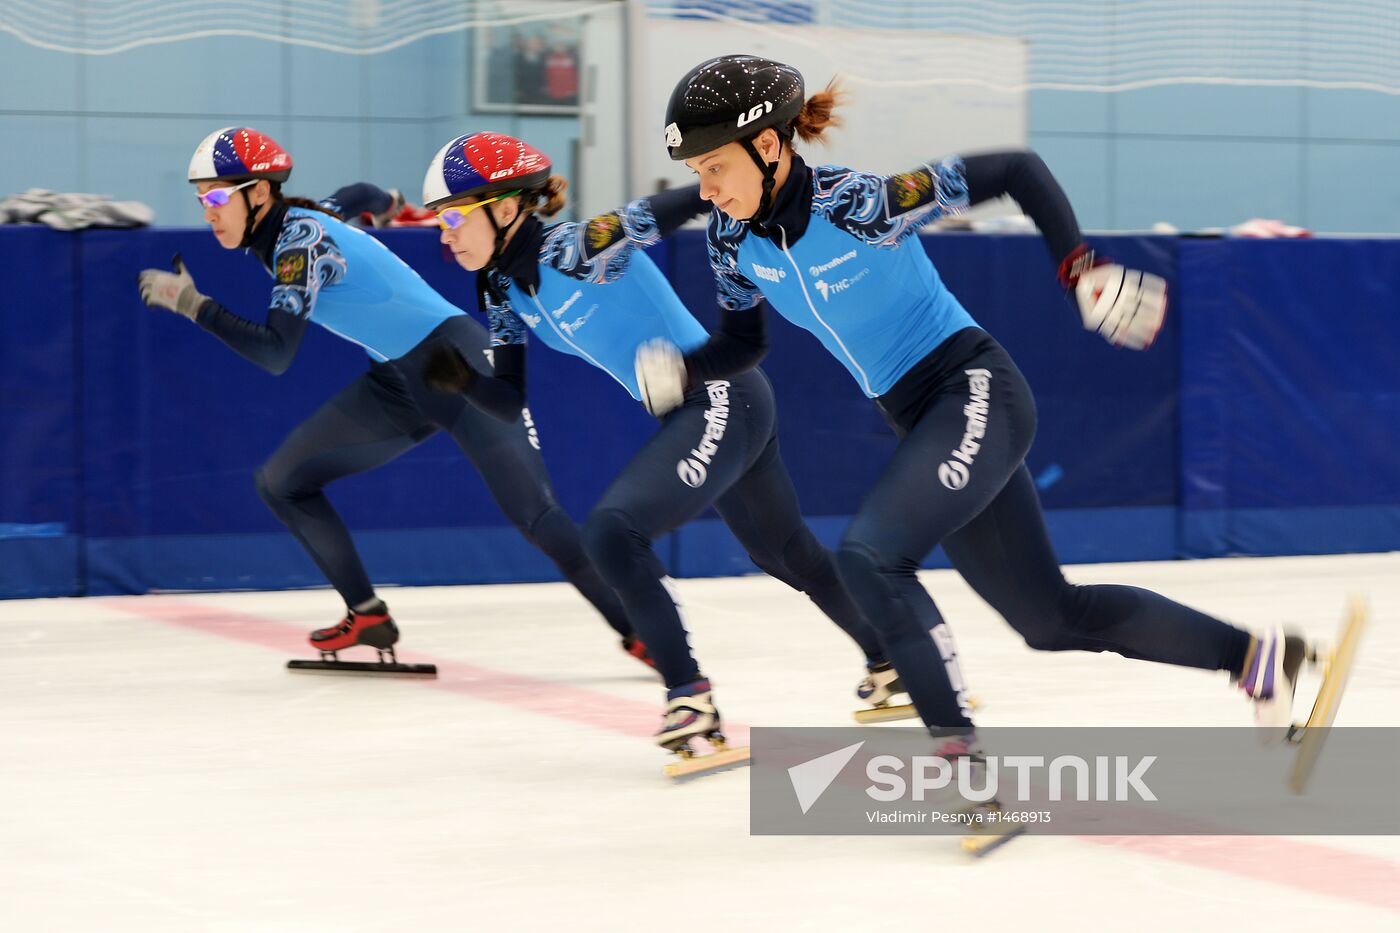 Training session of Russian national short track team